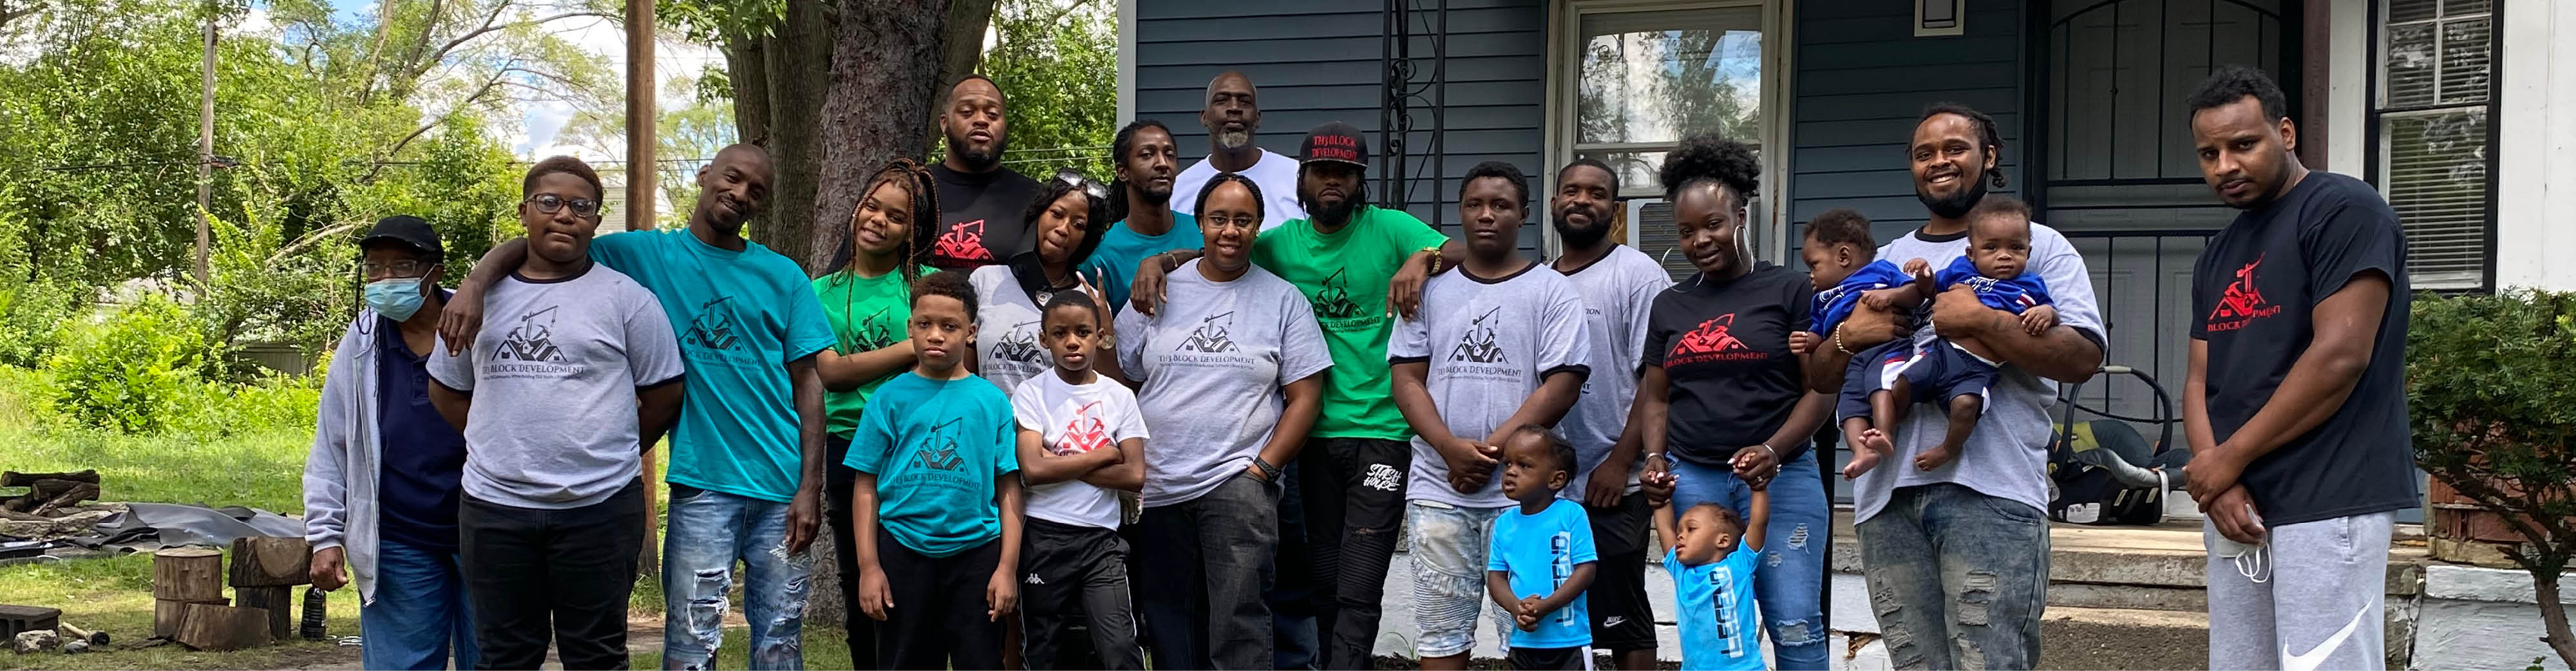 Detroit musician rebuilds community one house at a time 